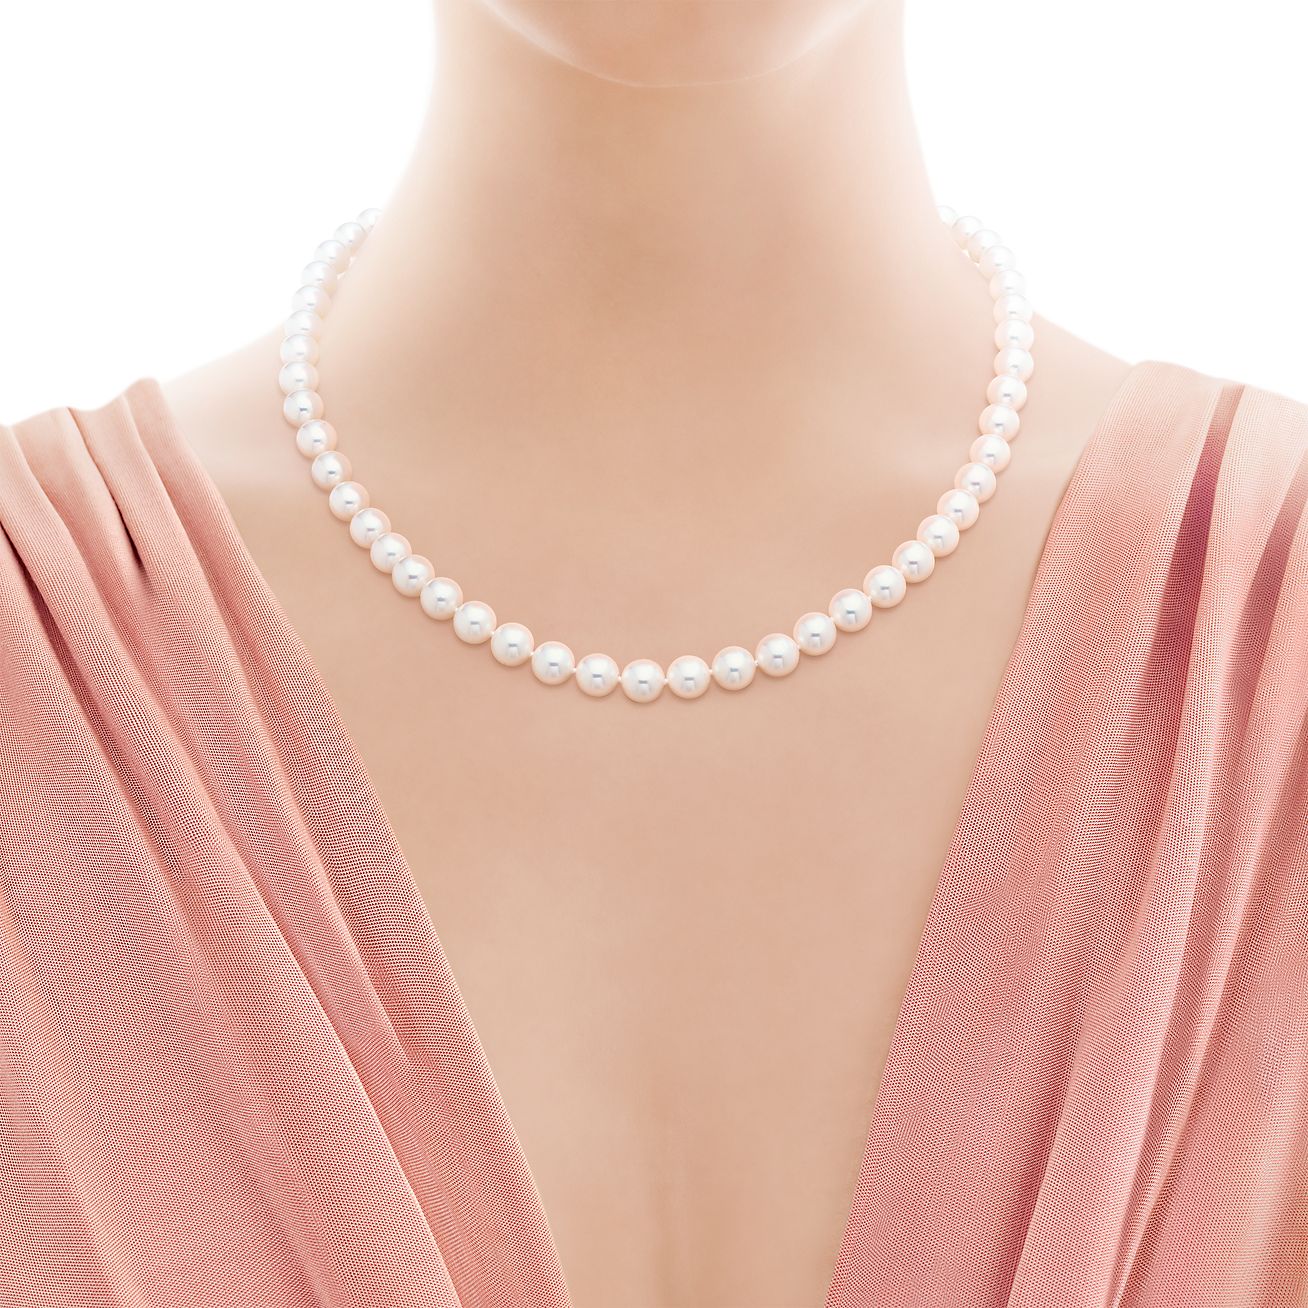 Tiffany Essential Pearls necklace of 